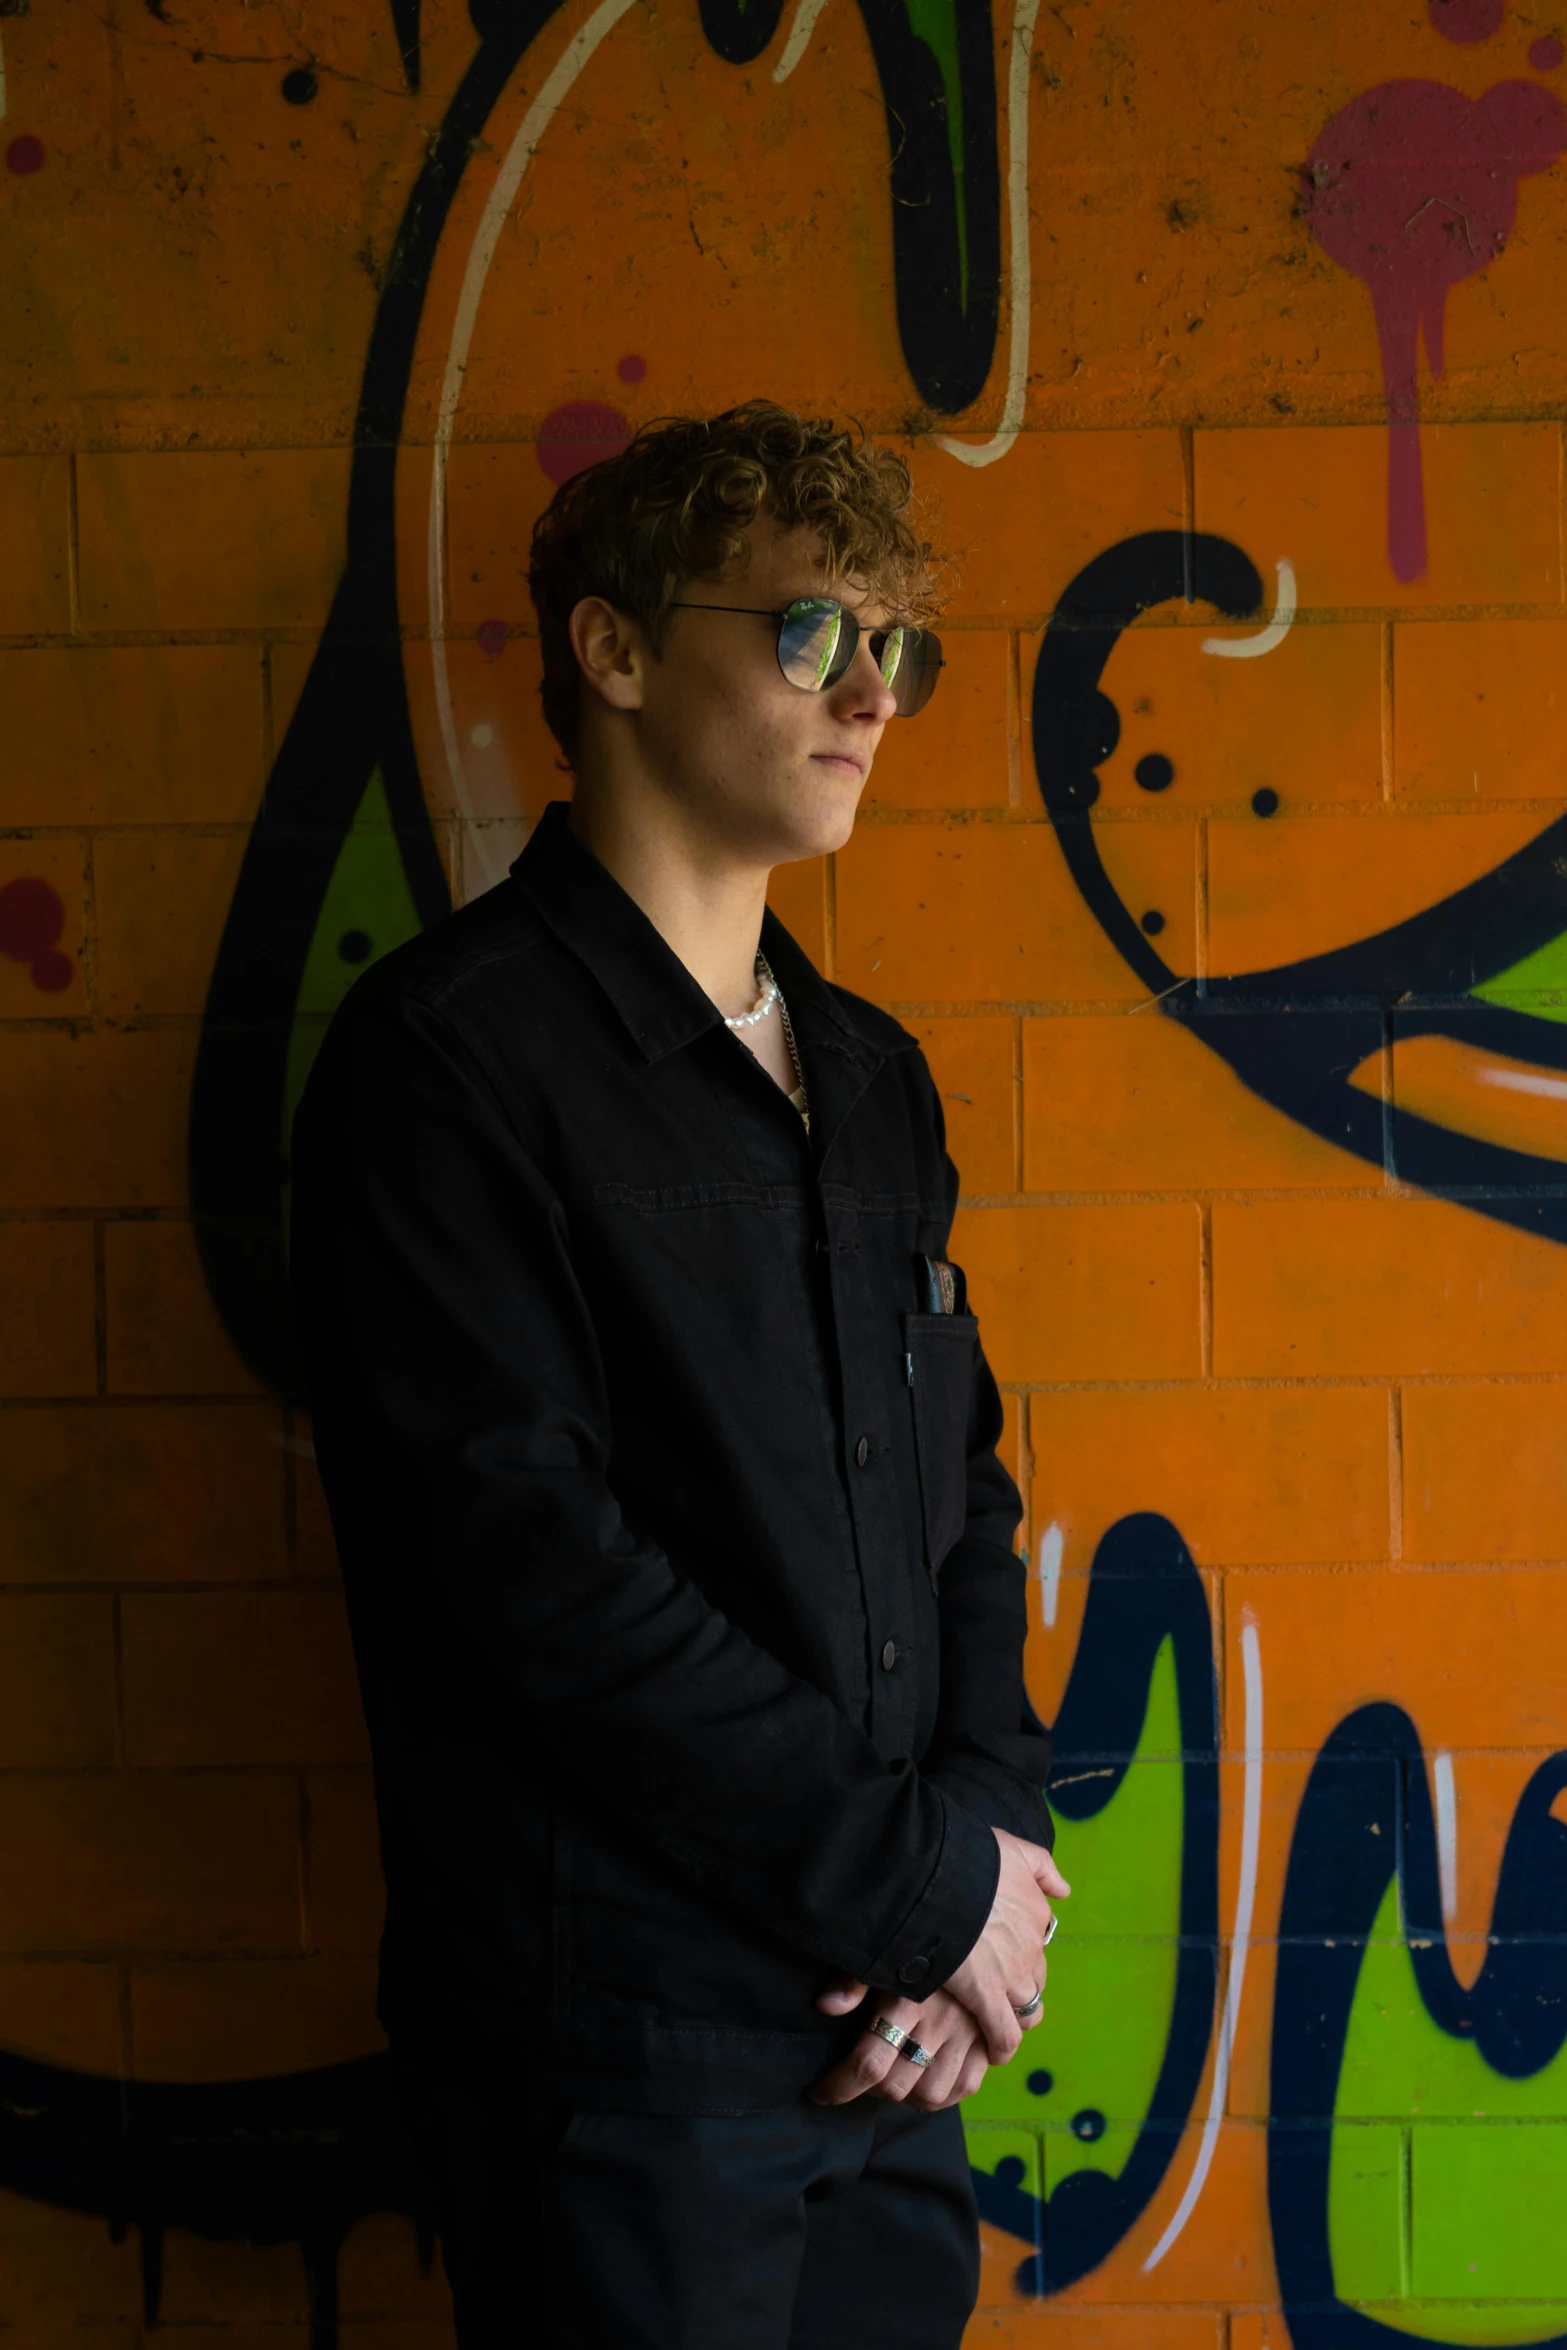 a young man wearing sunglasses stands in front of a wall with graffiti